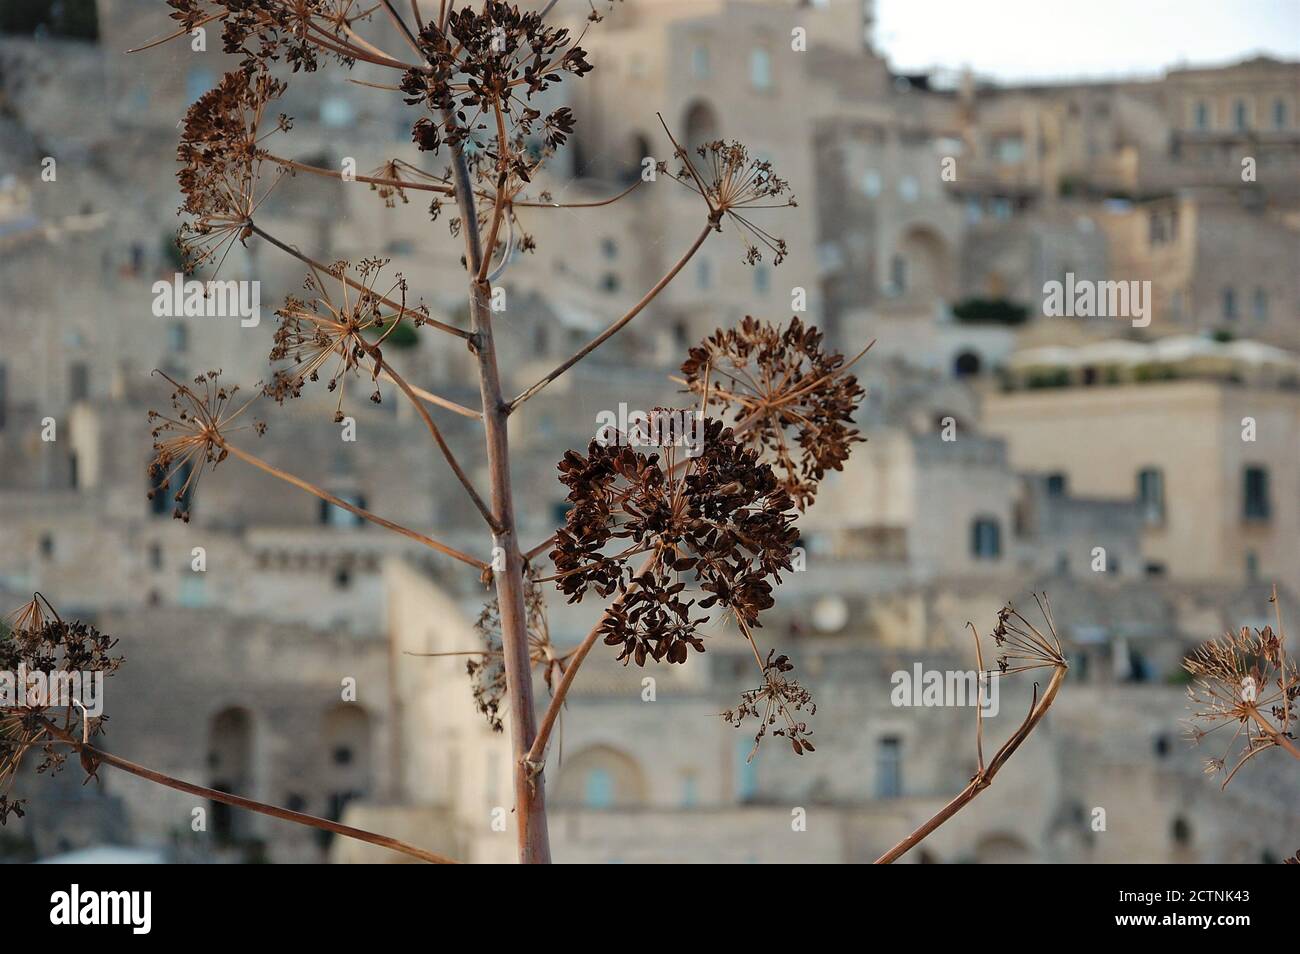 emotional caption of UNESCO site Sassi of Matera urban landscape and  wild dry brown flowers in foreground Stock Photo